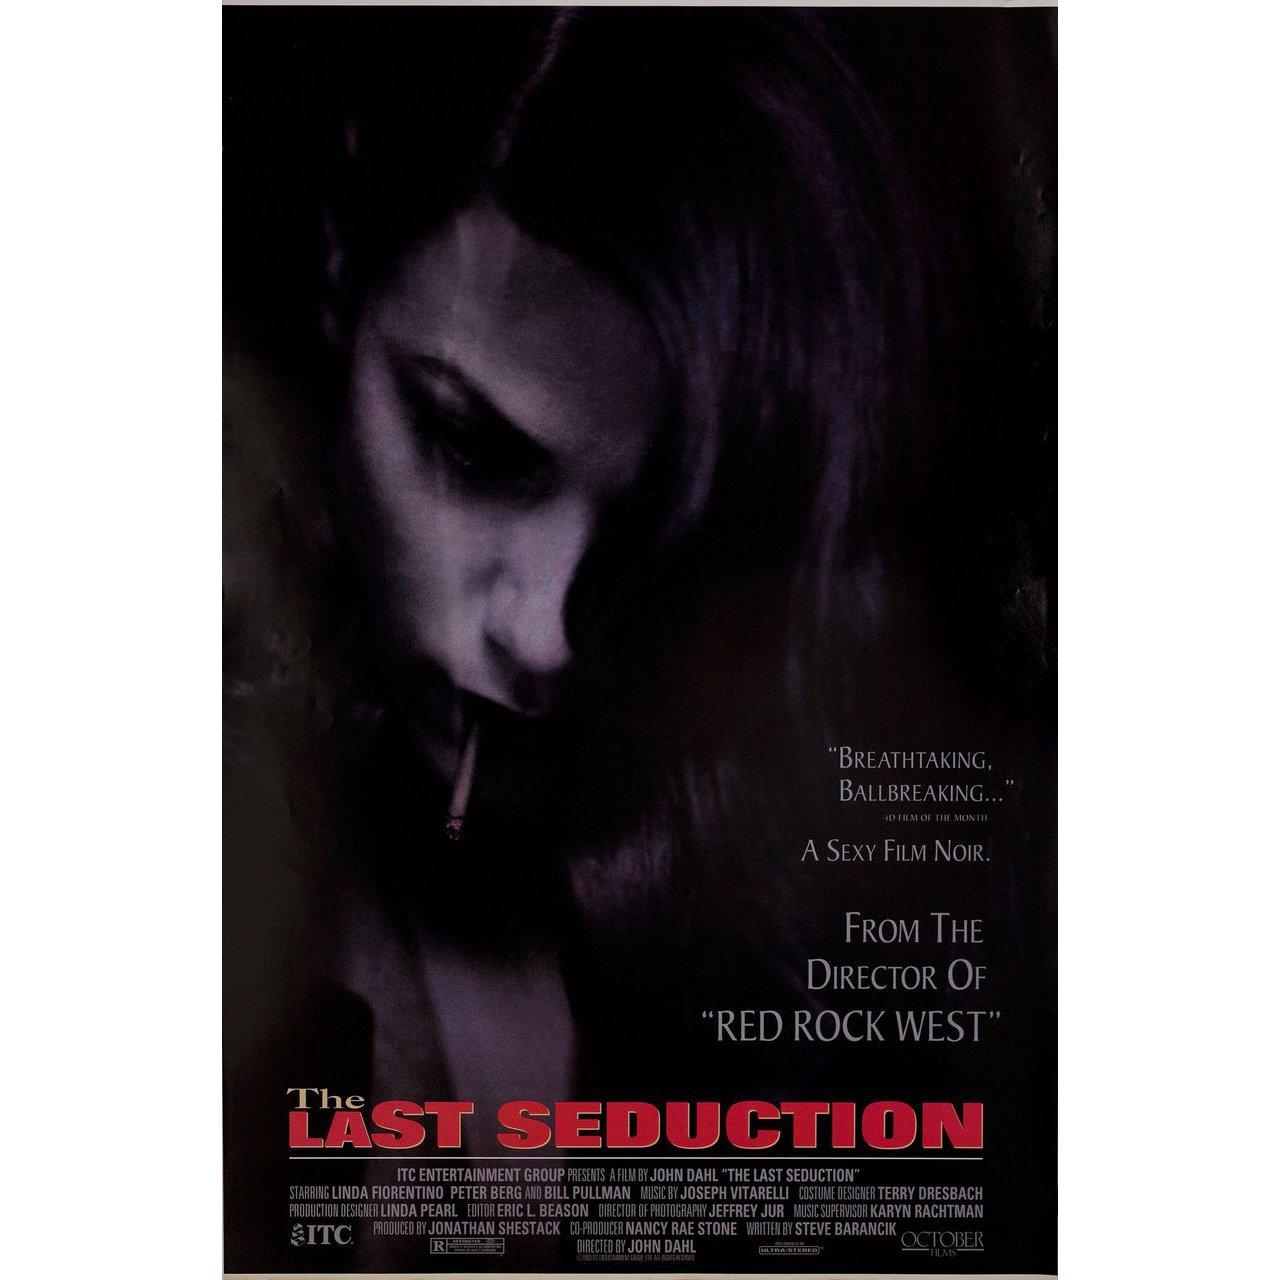 Original 1994 U.S. one sheet poster for the film The Last Seduction directed by John Dahl with Linda Fiorentino / Bill Pullman / Michael Raysses / Zack Phifer. Very Good-Fine condition, rolled. Please note: the size is stated in inches and the